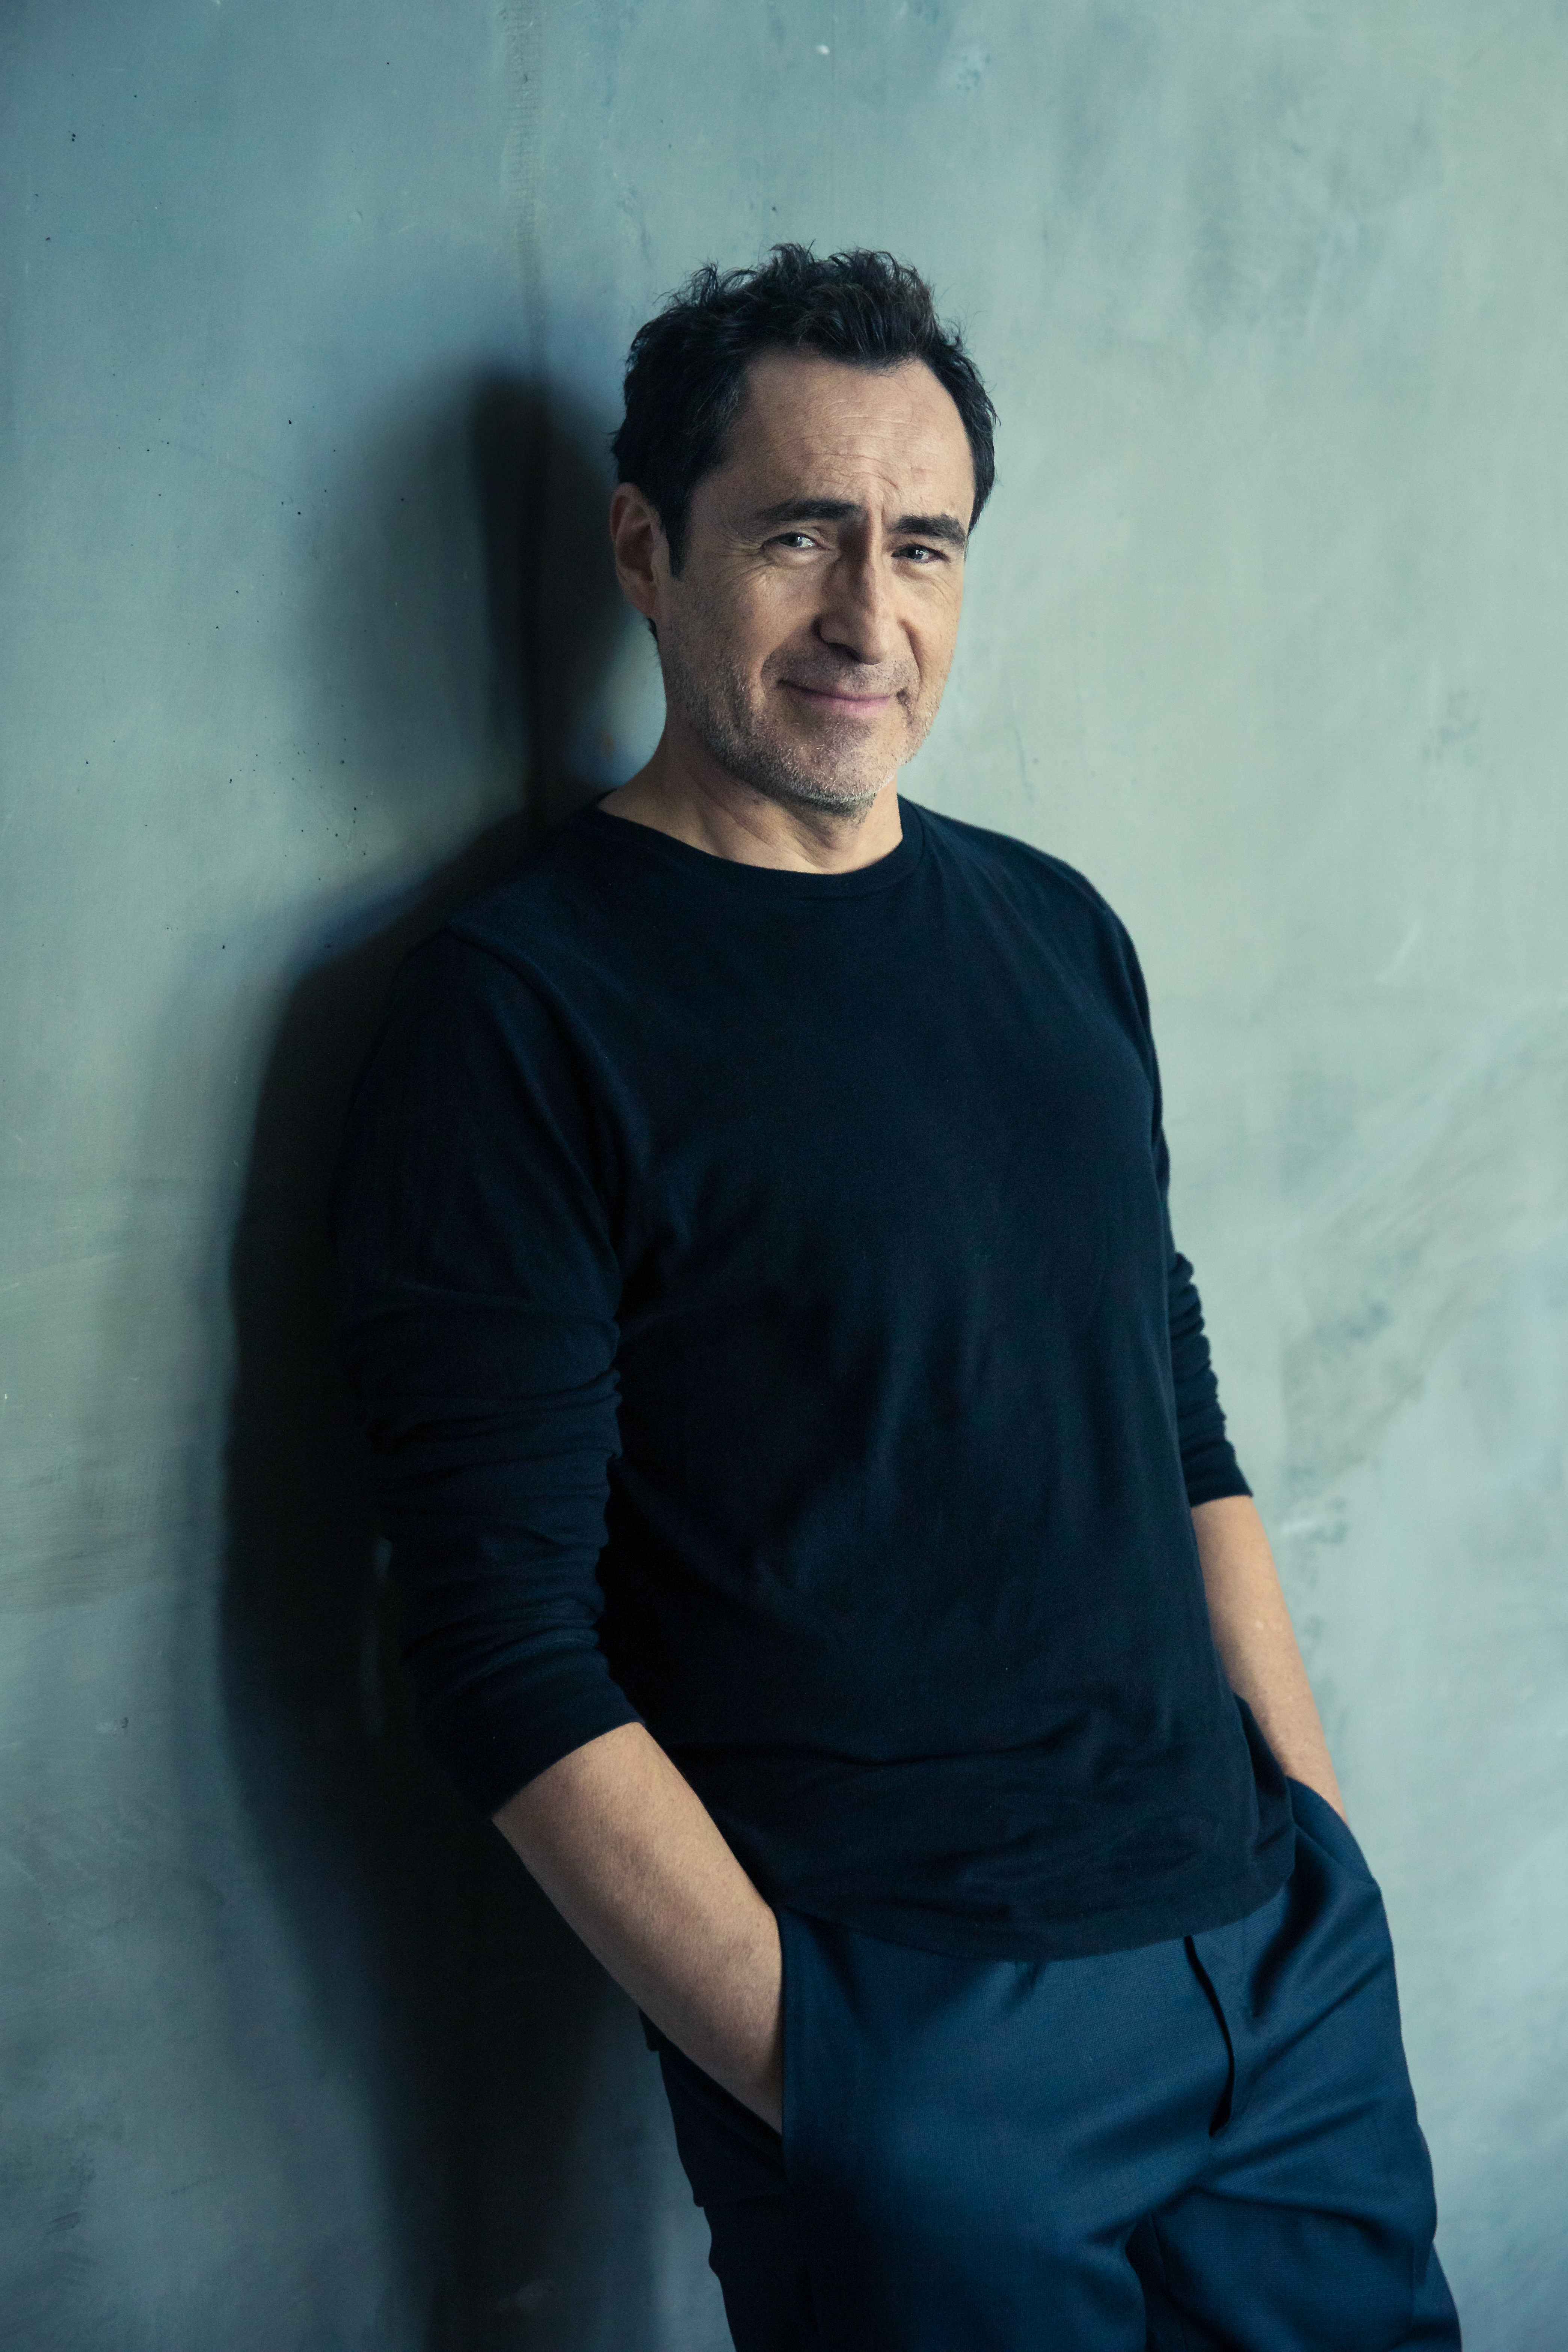 Demián Bichir isn’t just lucky. Even Brad Pitt and George Clooney can’t do what he can